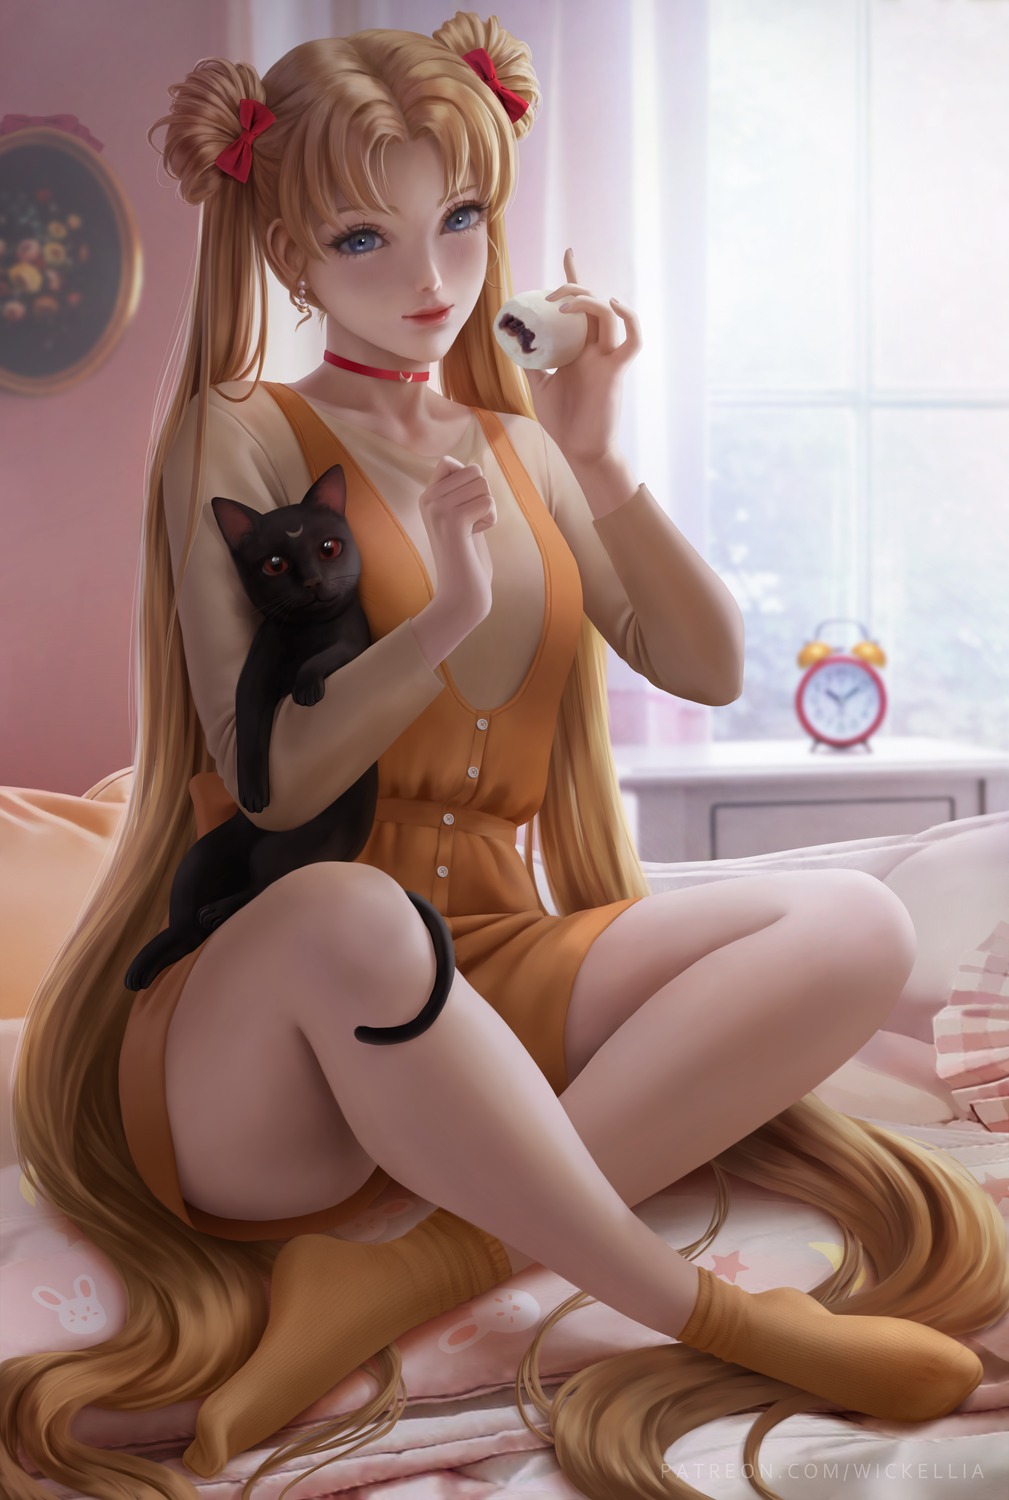 Anime Girls Fictional Character Wickellia Sailor Moon Black Cats Cats Blonde Long Hair Twintails In  1009x1500